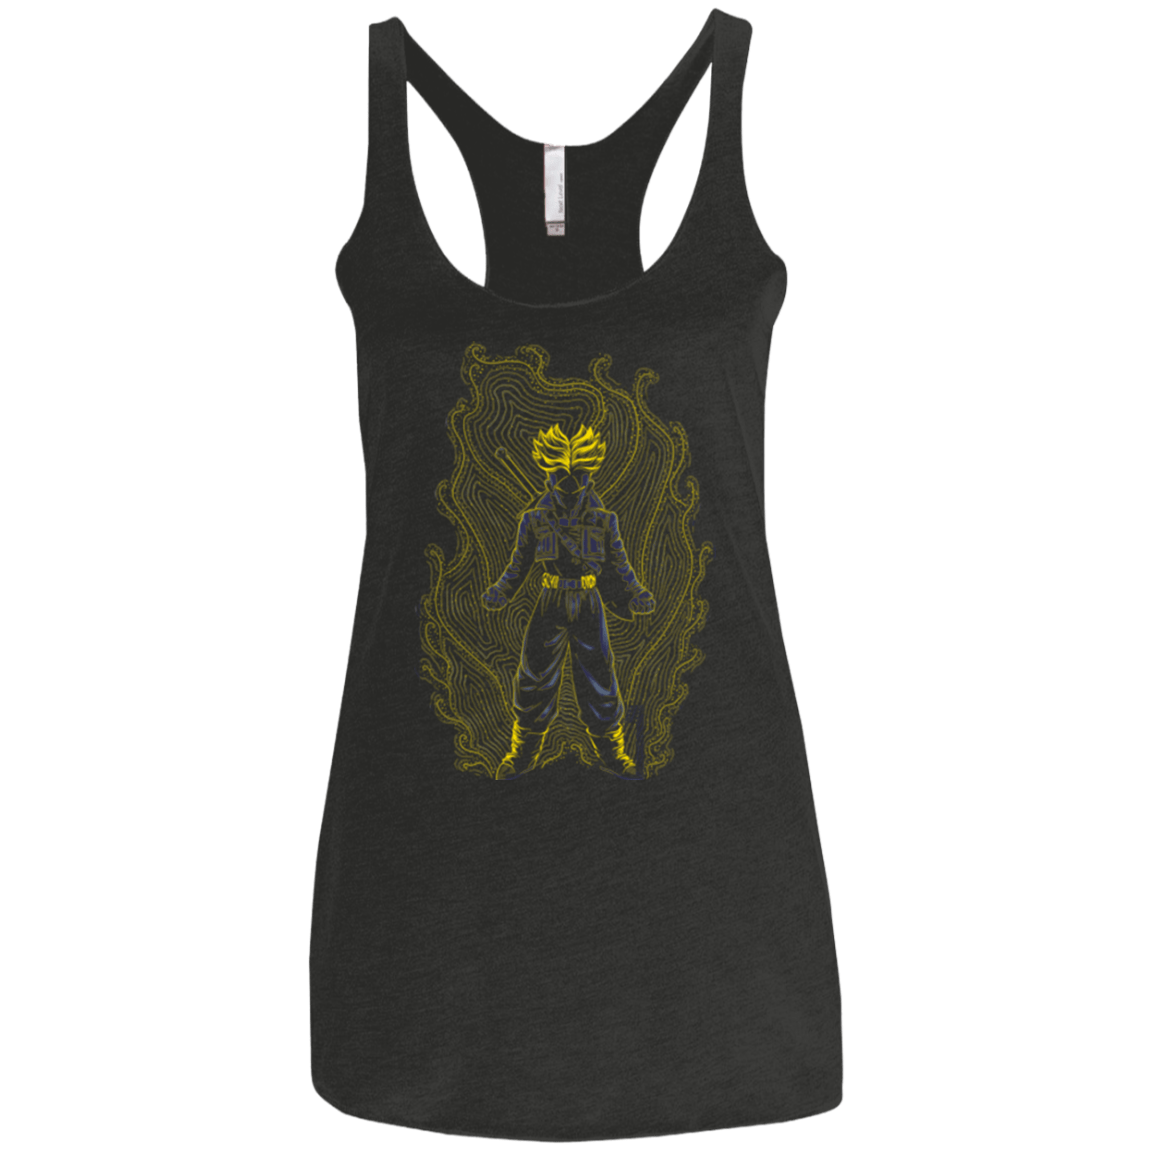 From The future Women's Triblend Racerback Tank